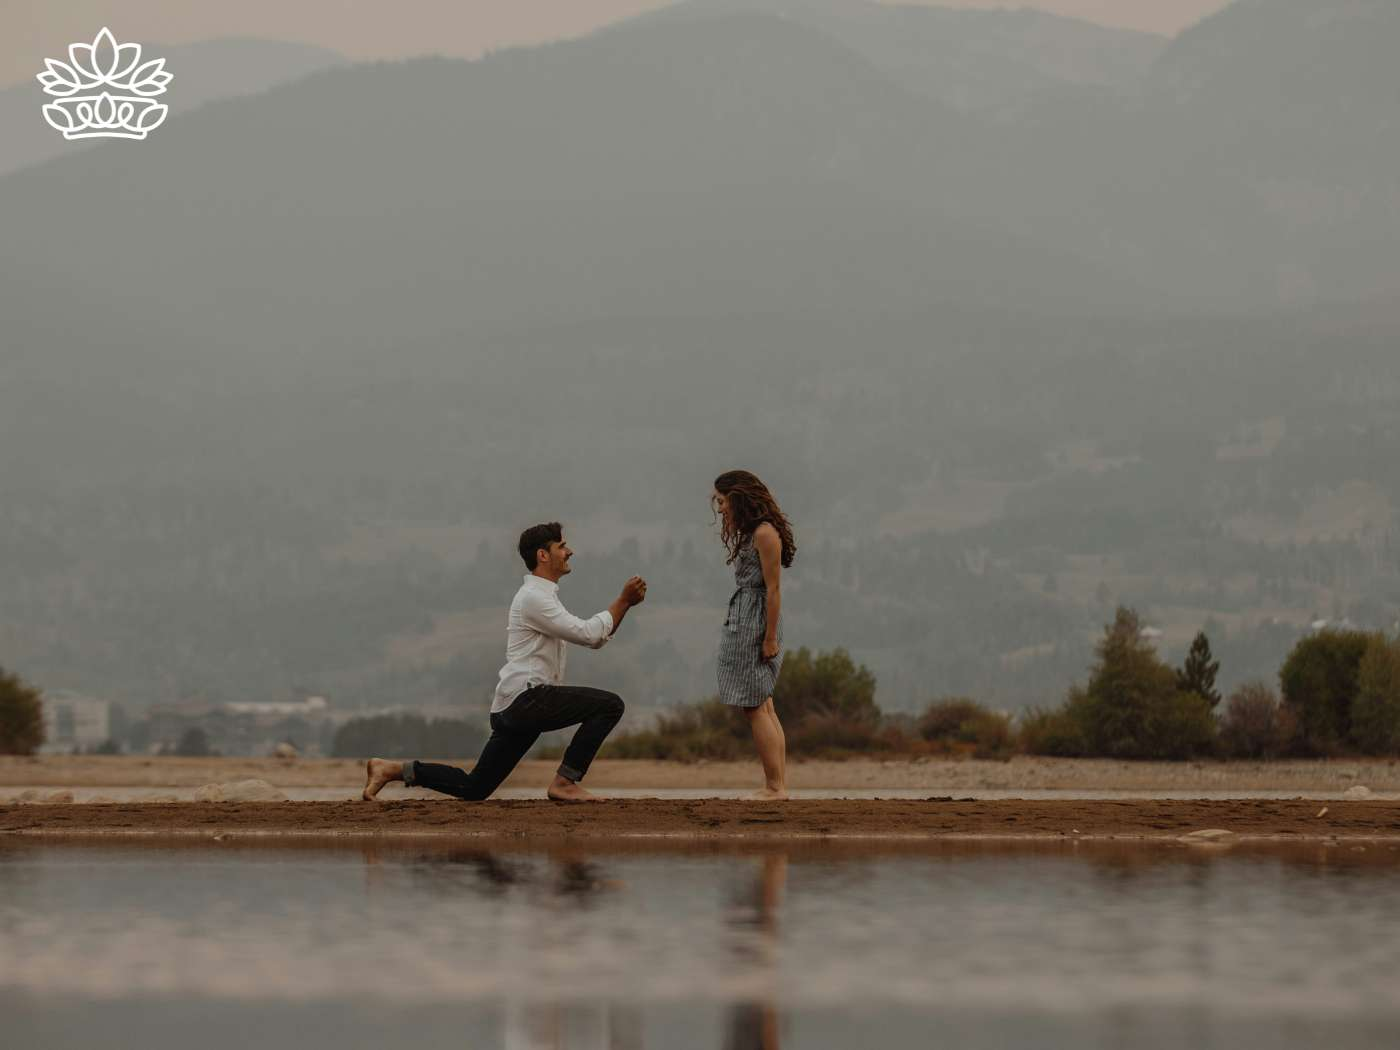 A happy couple during a heartfelt proposal, with the man on one knee by a serene lakeside, a backdrop of misty mountains enhancing the moment. This scene captures the essence of the best engagement gift, offered in a sweet way from the Engagement Collection at Fabulous Flowers and Gifts